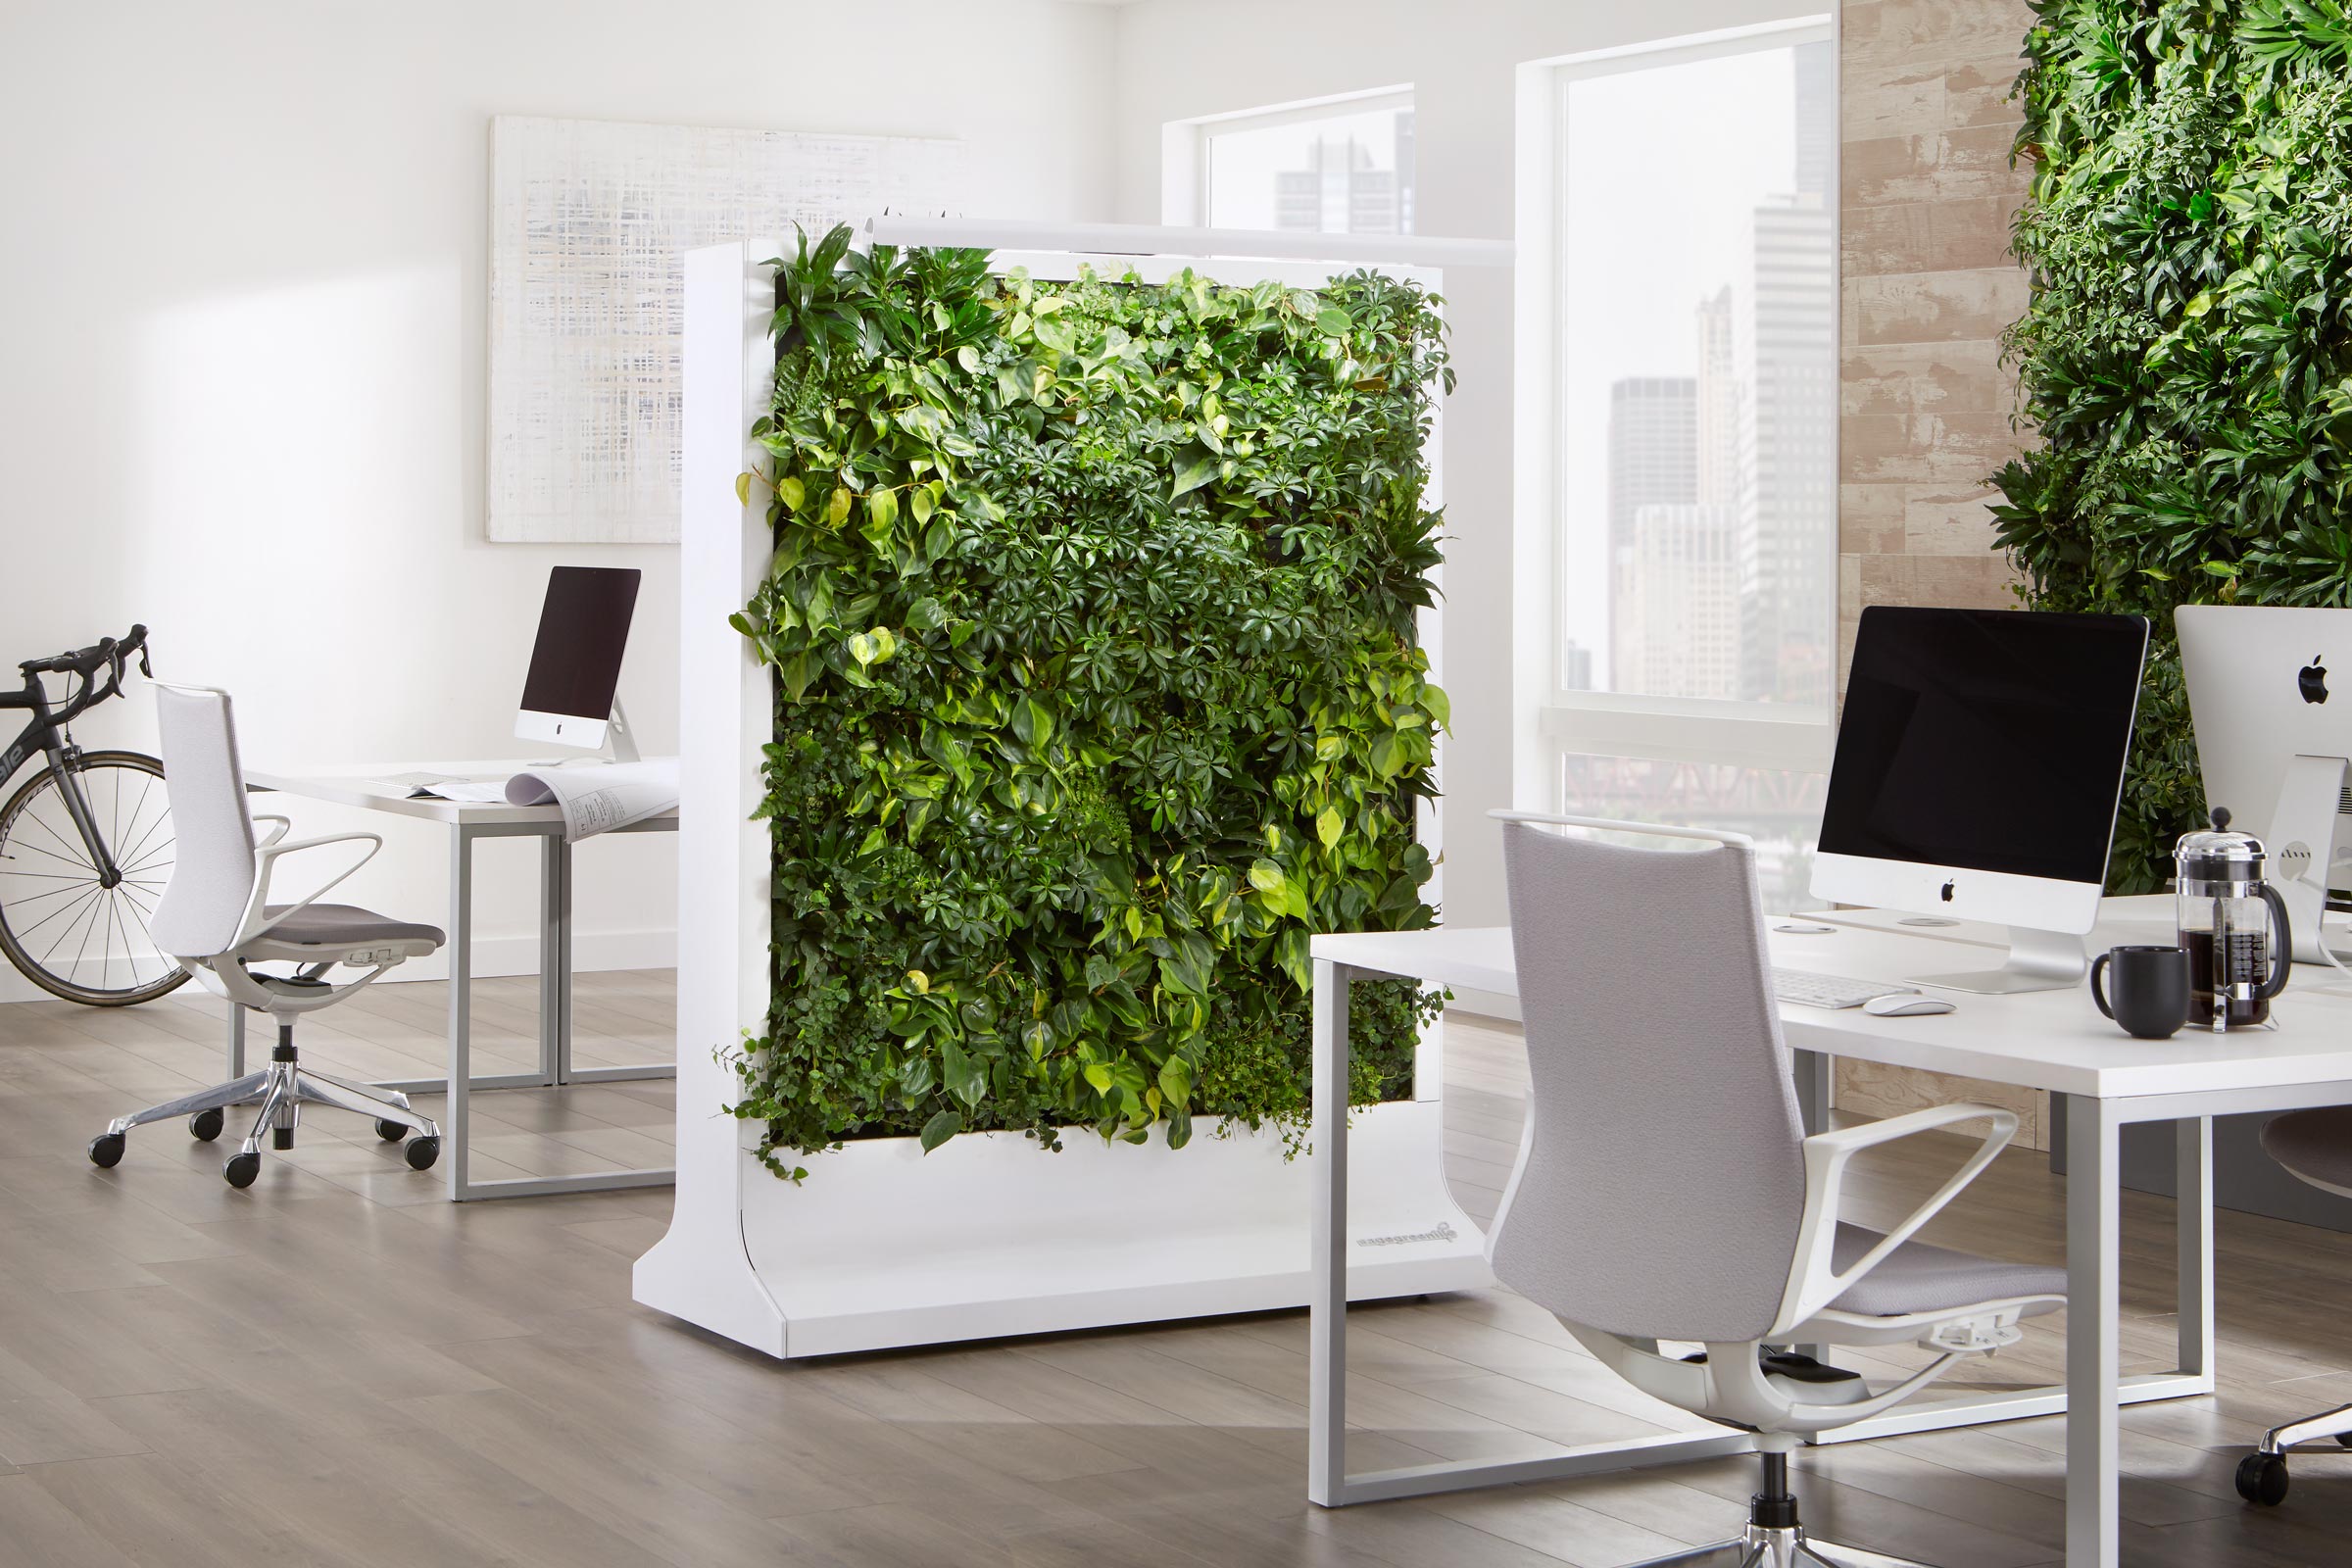 How to Make Better Spaces with Biophilic Design